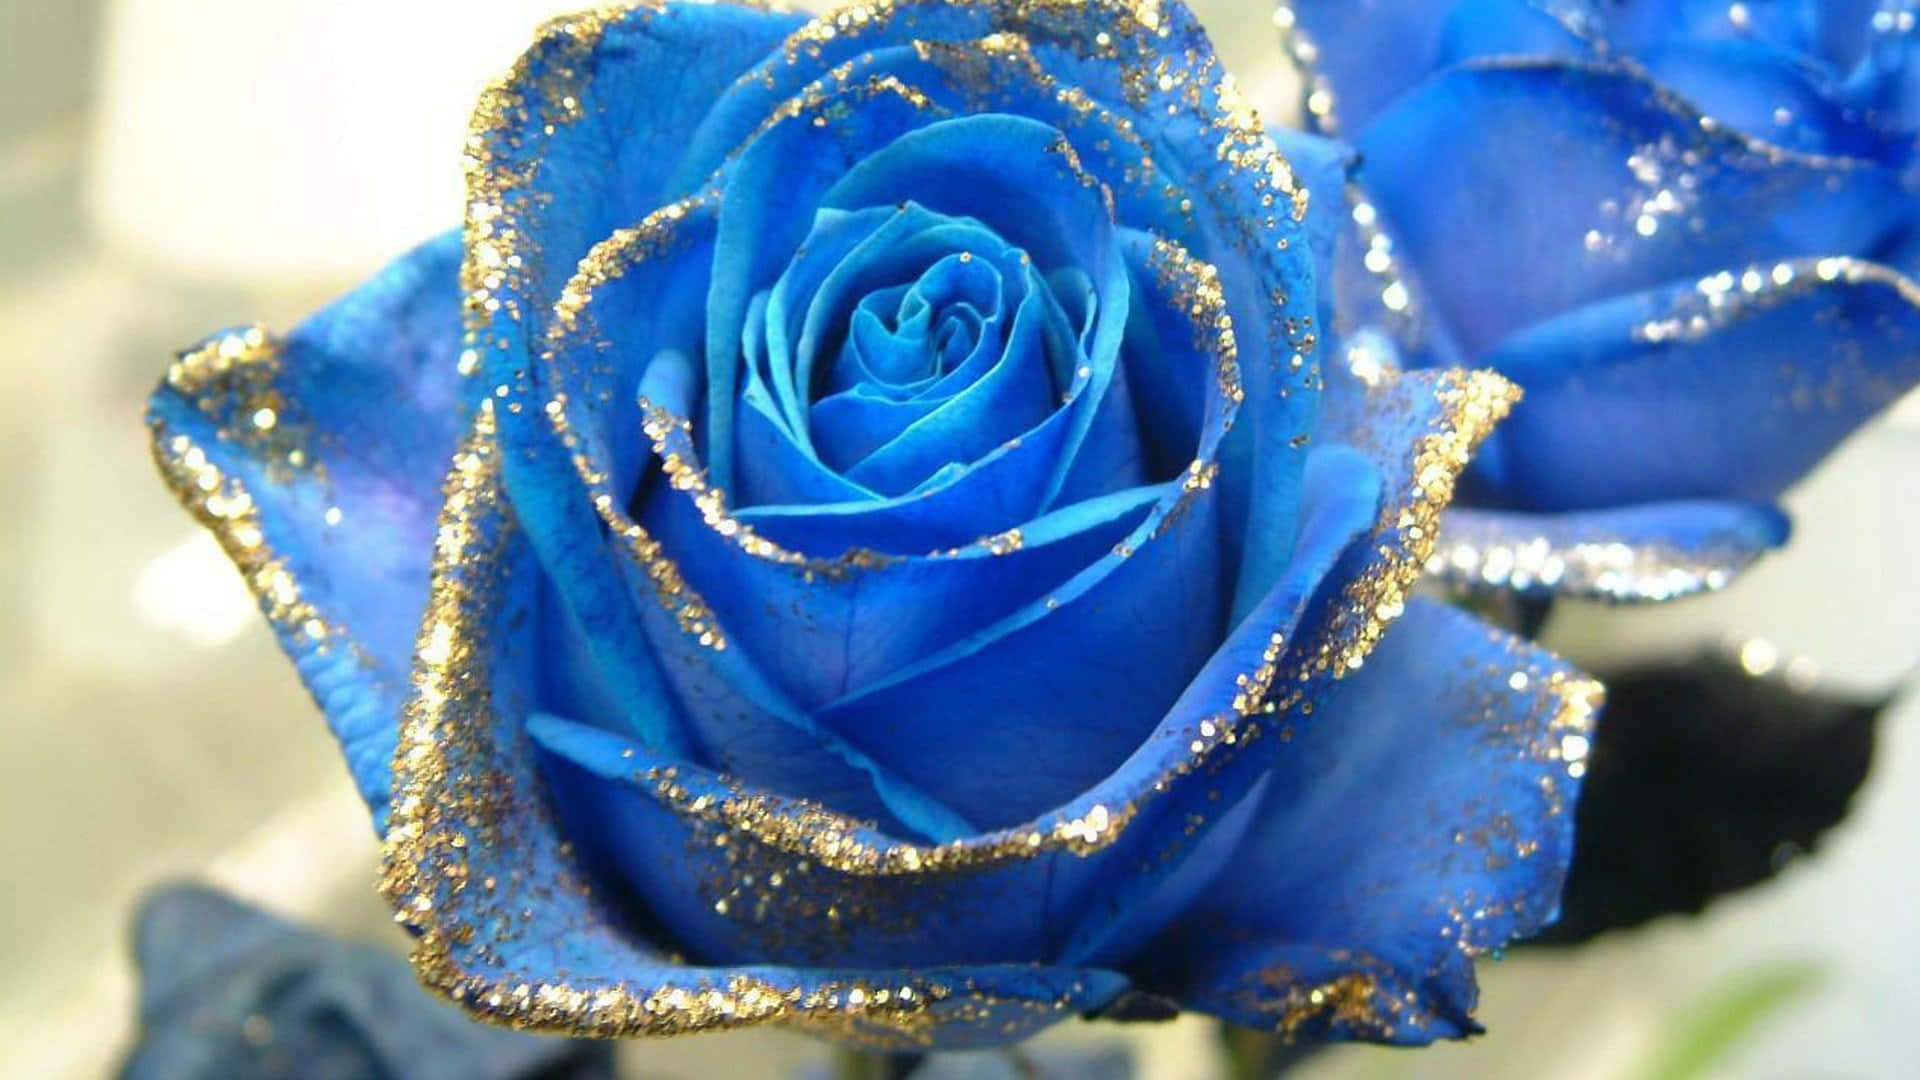 A Gorgeous Bouquet Of Delicate Blue Roses.